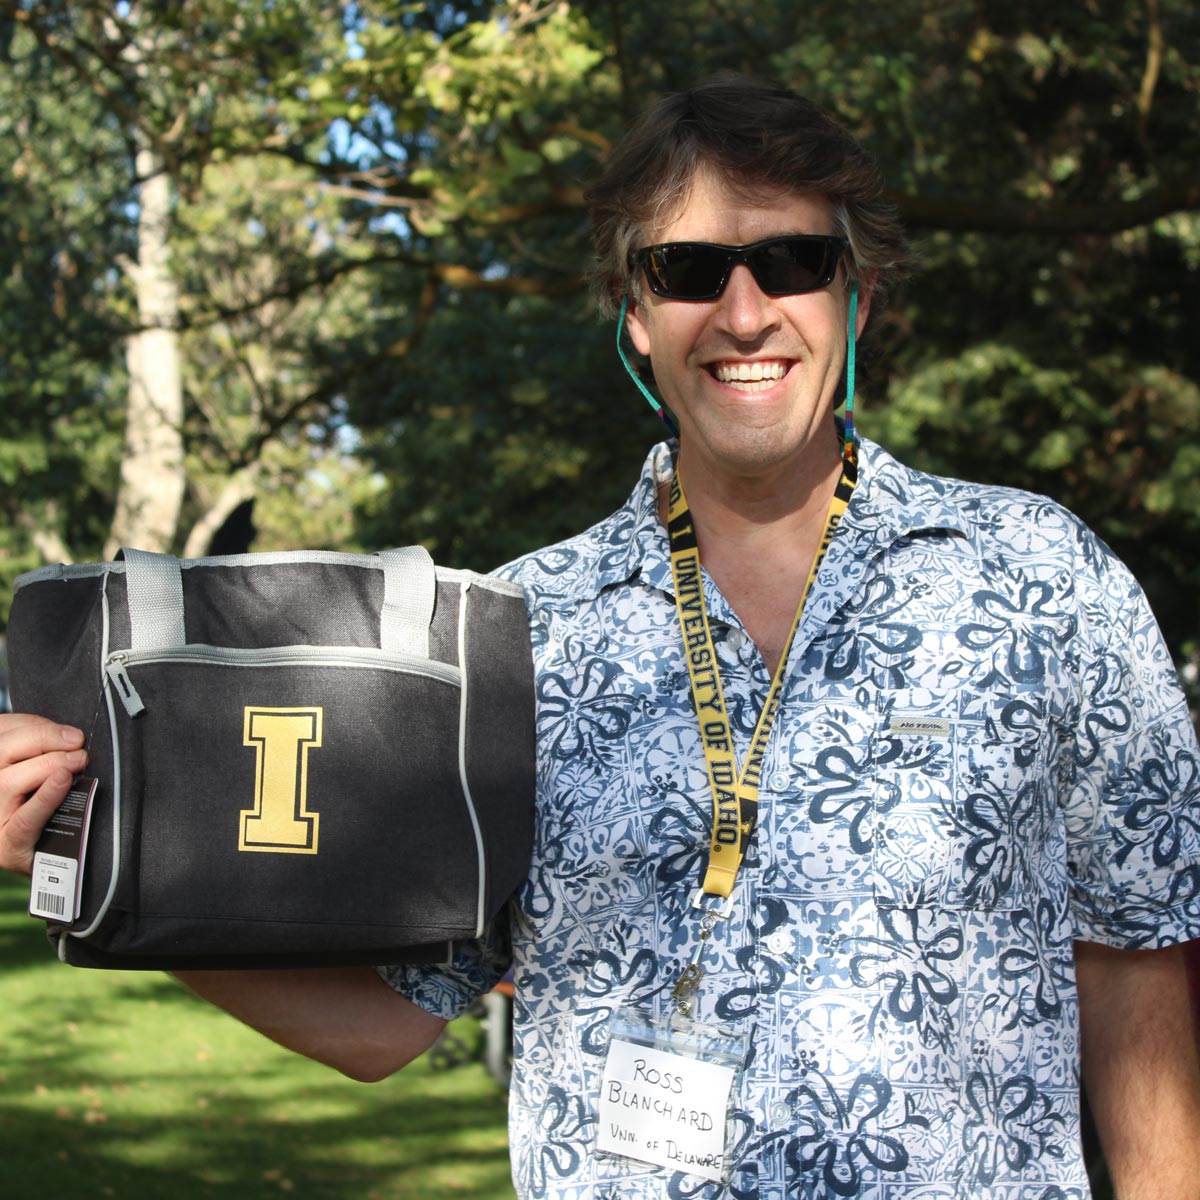 Law student Steven Blanchard poses with his prize, a totebag.